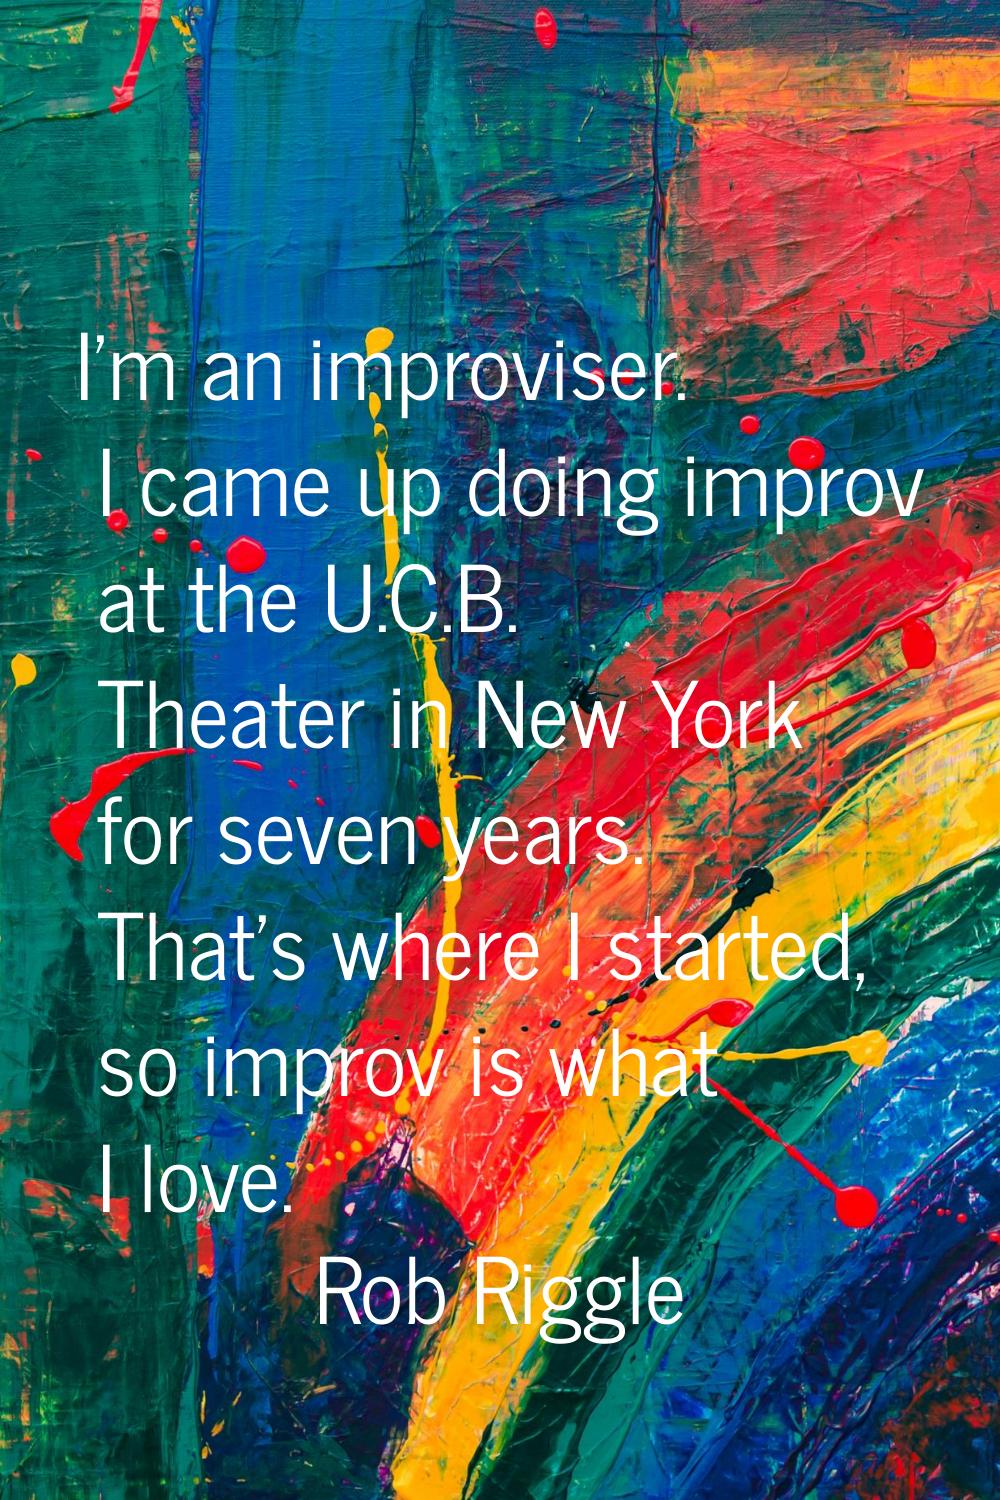 I'm an improviser. I came up doing improv at the U.C.B. Theater in New York for seven years. That's